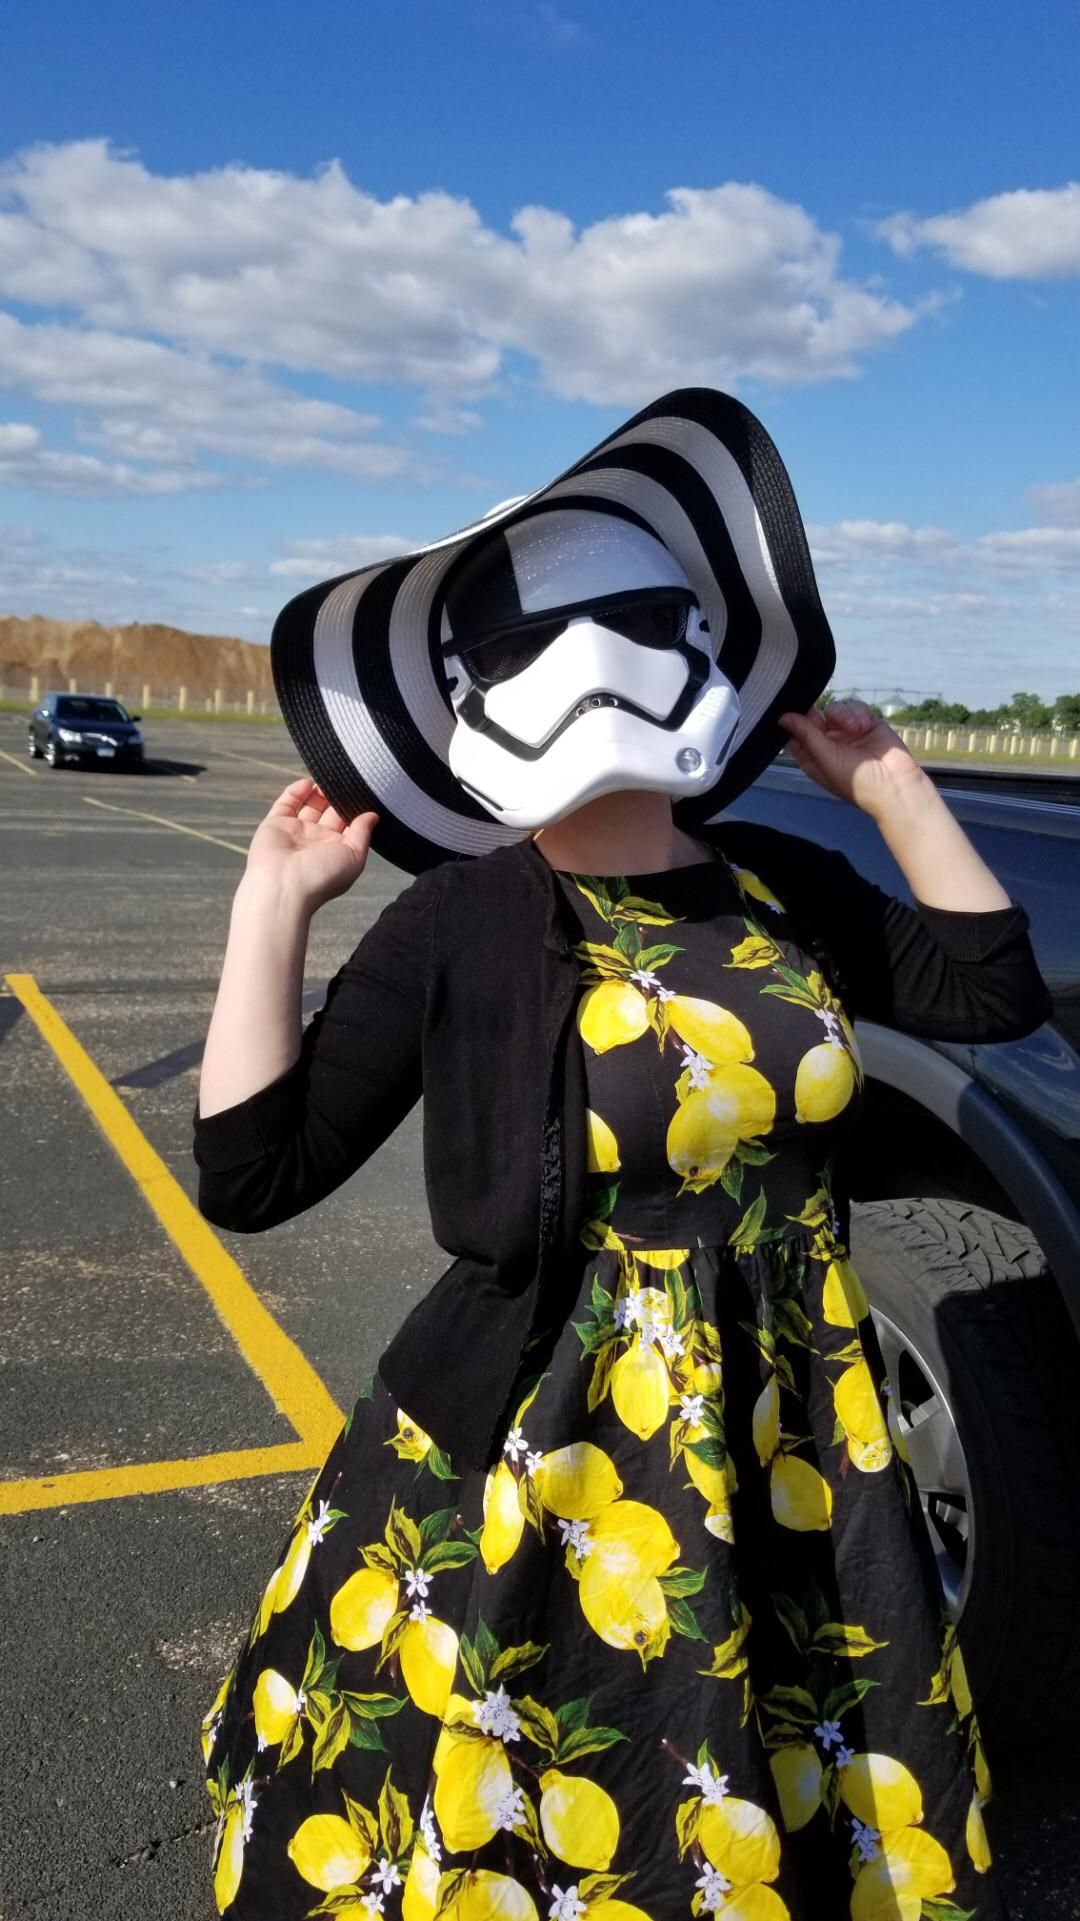 Even a Stormtrooper likes to feel pretty.